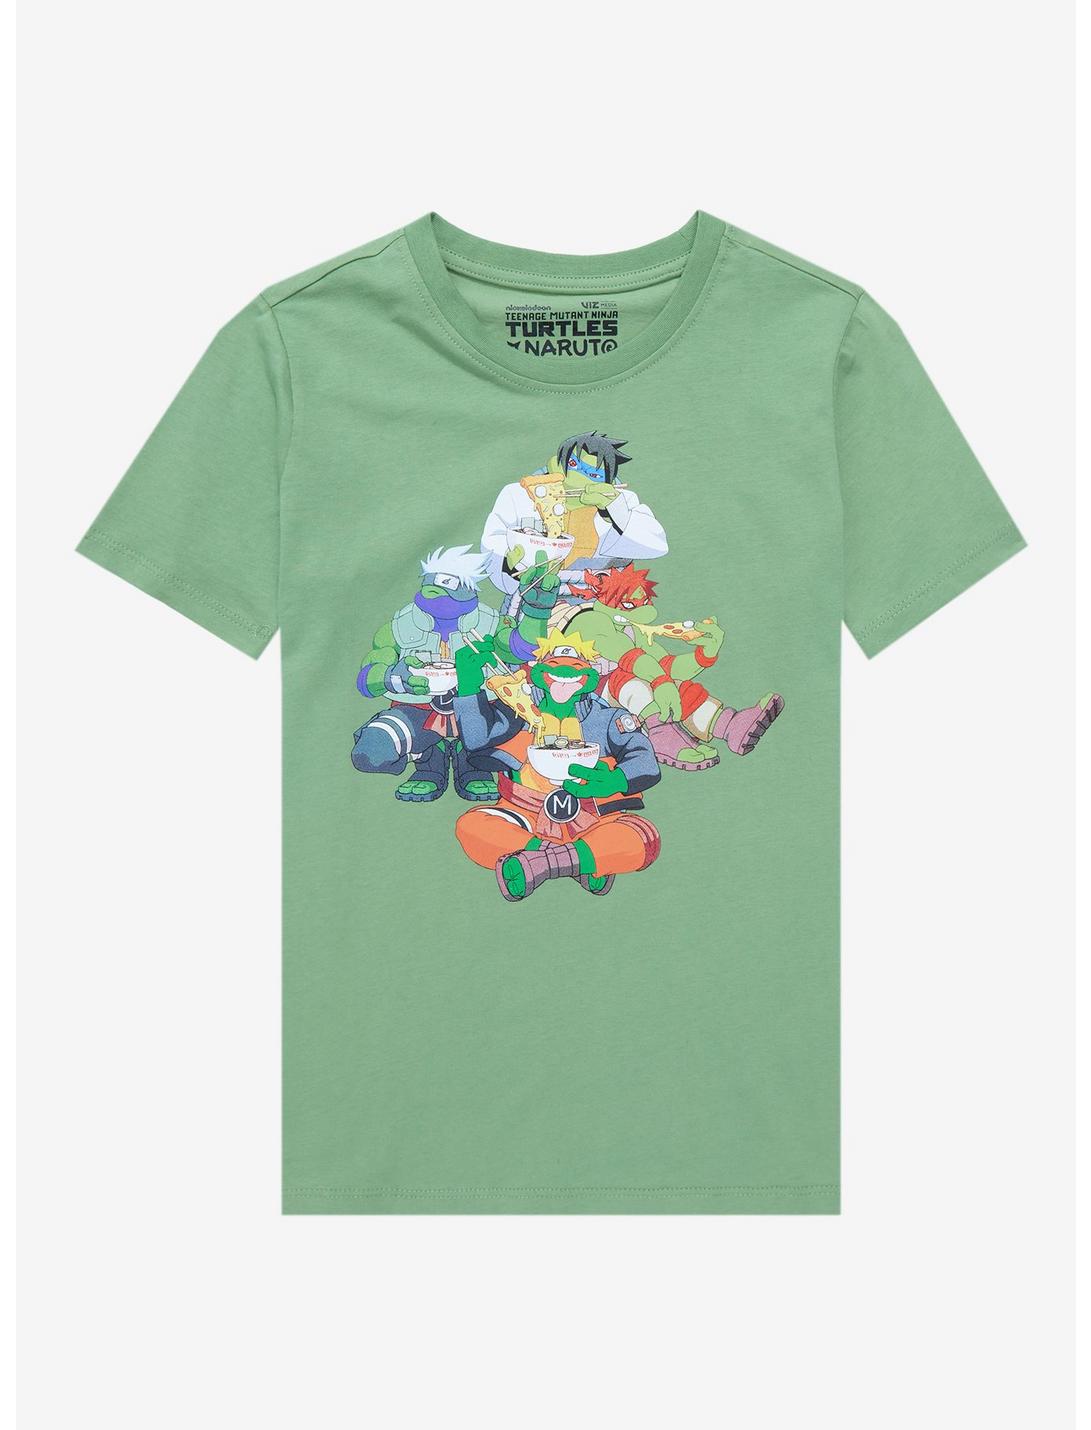 Teenage Mutant Ninja Turtles x Naruto Group Shot Youth T-Shirt - BoxLunch Exclusive, FOREST GREEN, hi-res